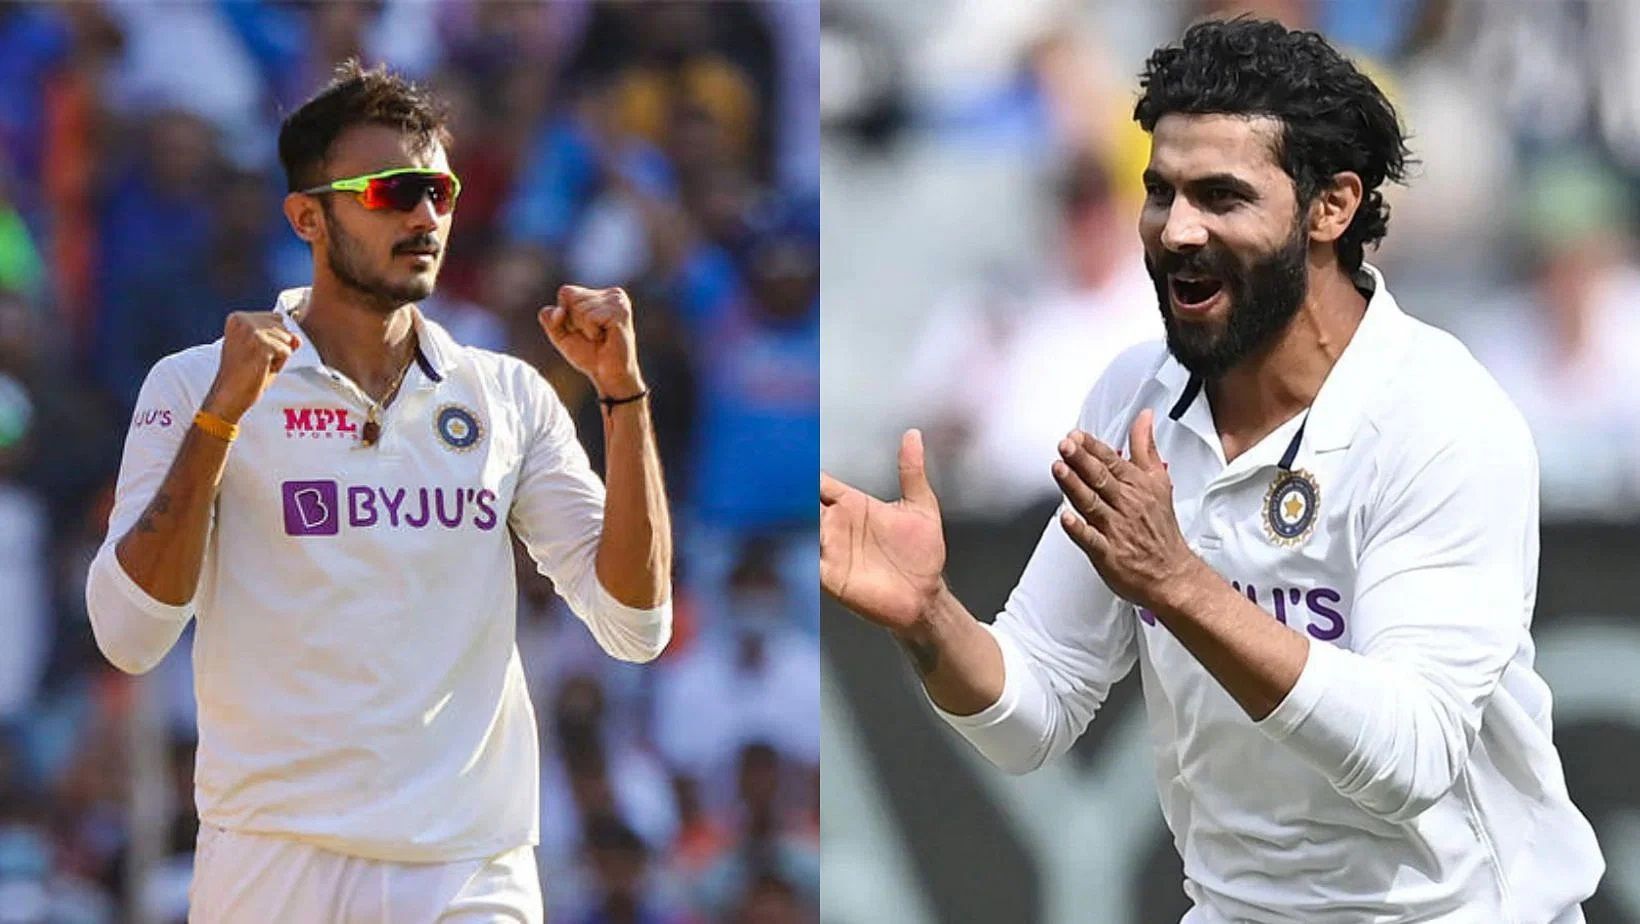 Axar Patel and Ravindra Jadeja could compete for one spot in the Test series against Australia.